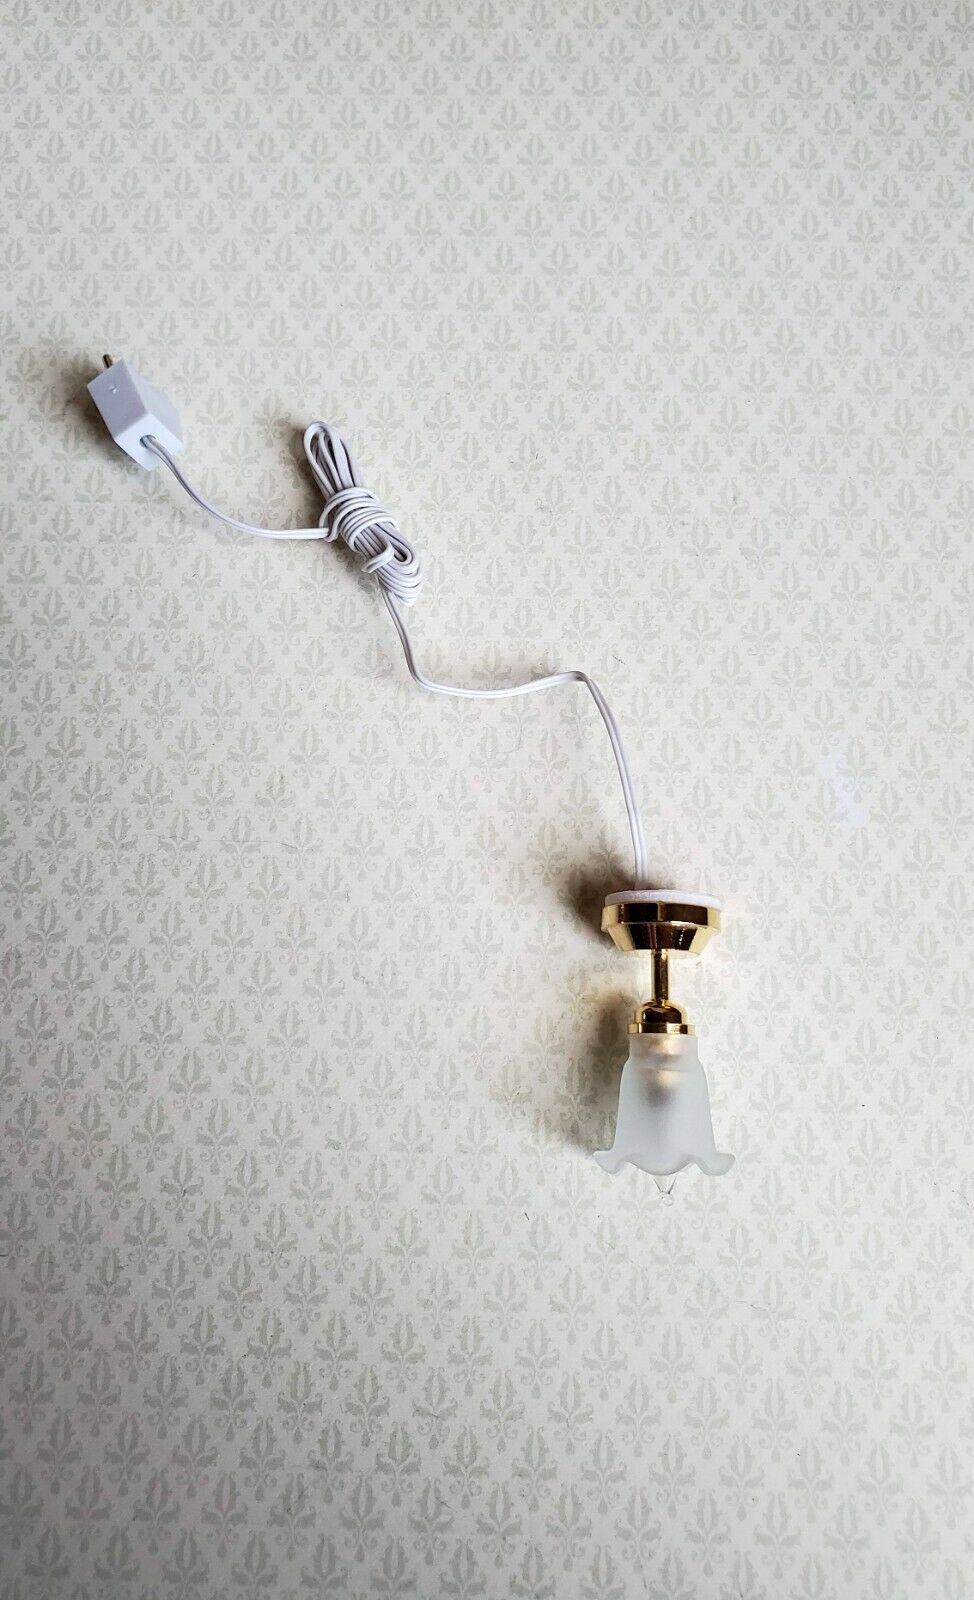 Dollhouse Miniature Tulip Ceiling Light Small Hanging Electric 1:12 Scale 12v - Miniature Crush